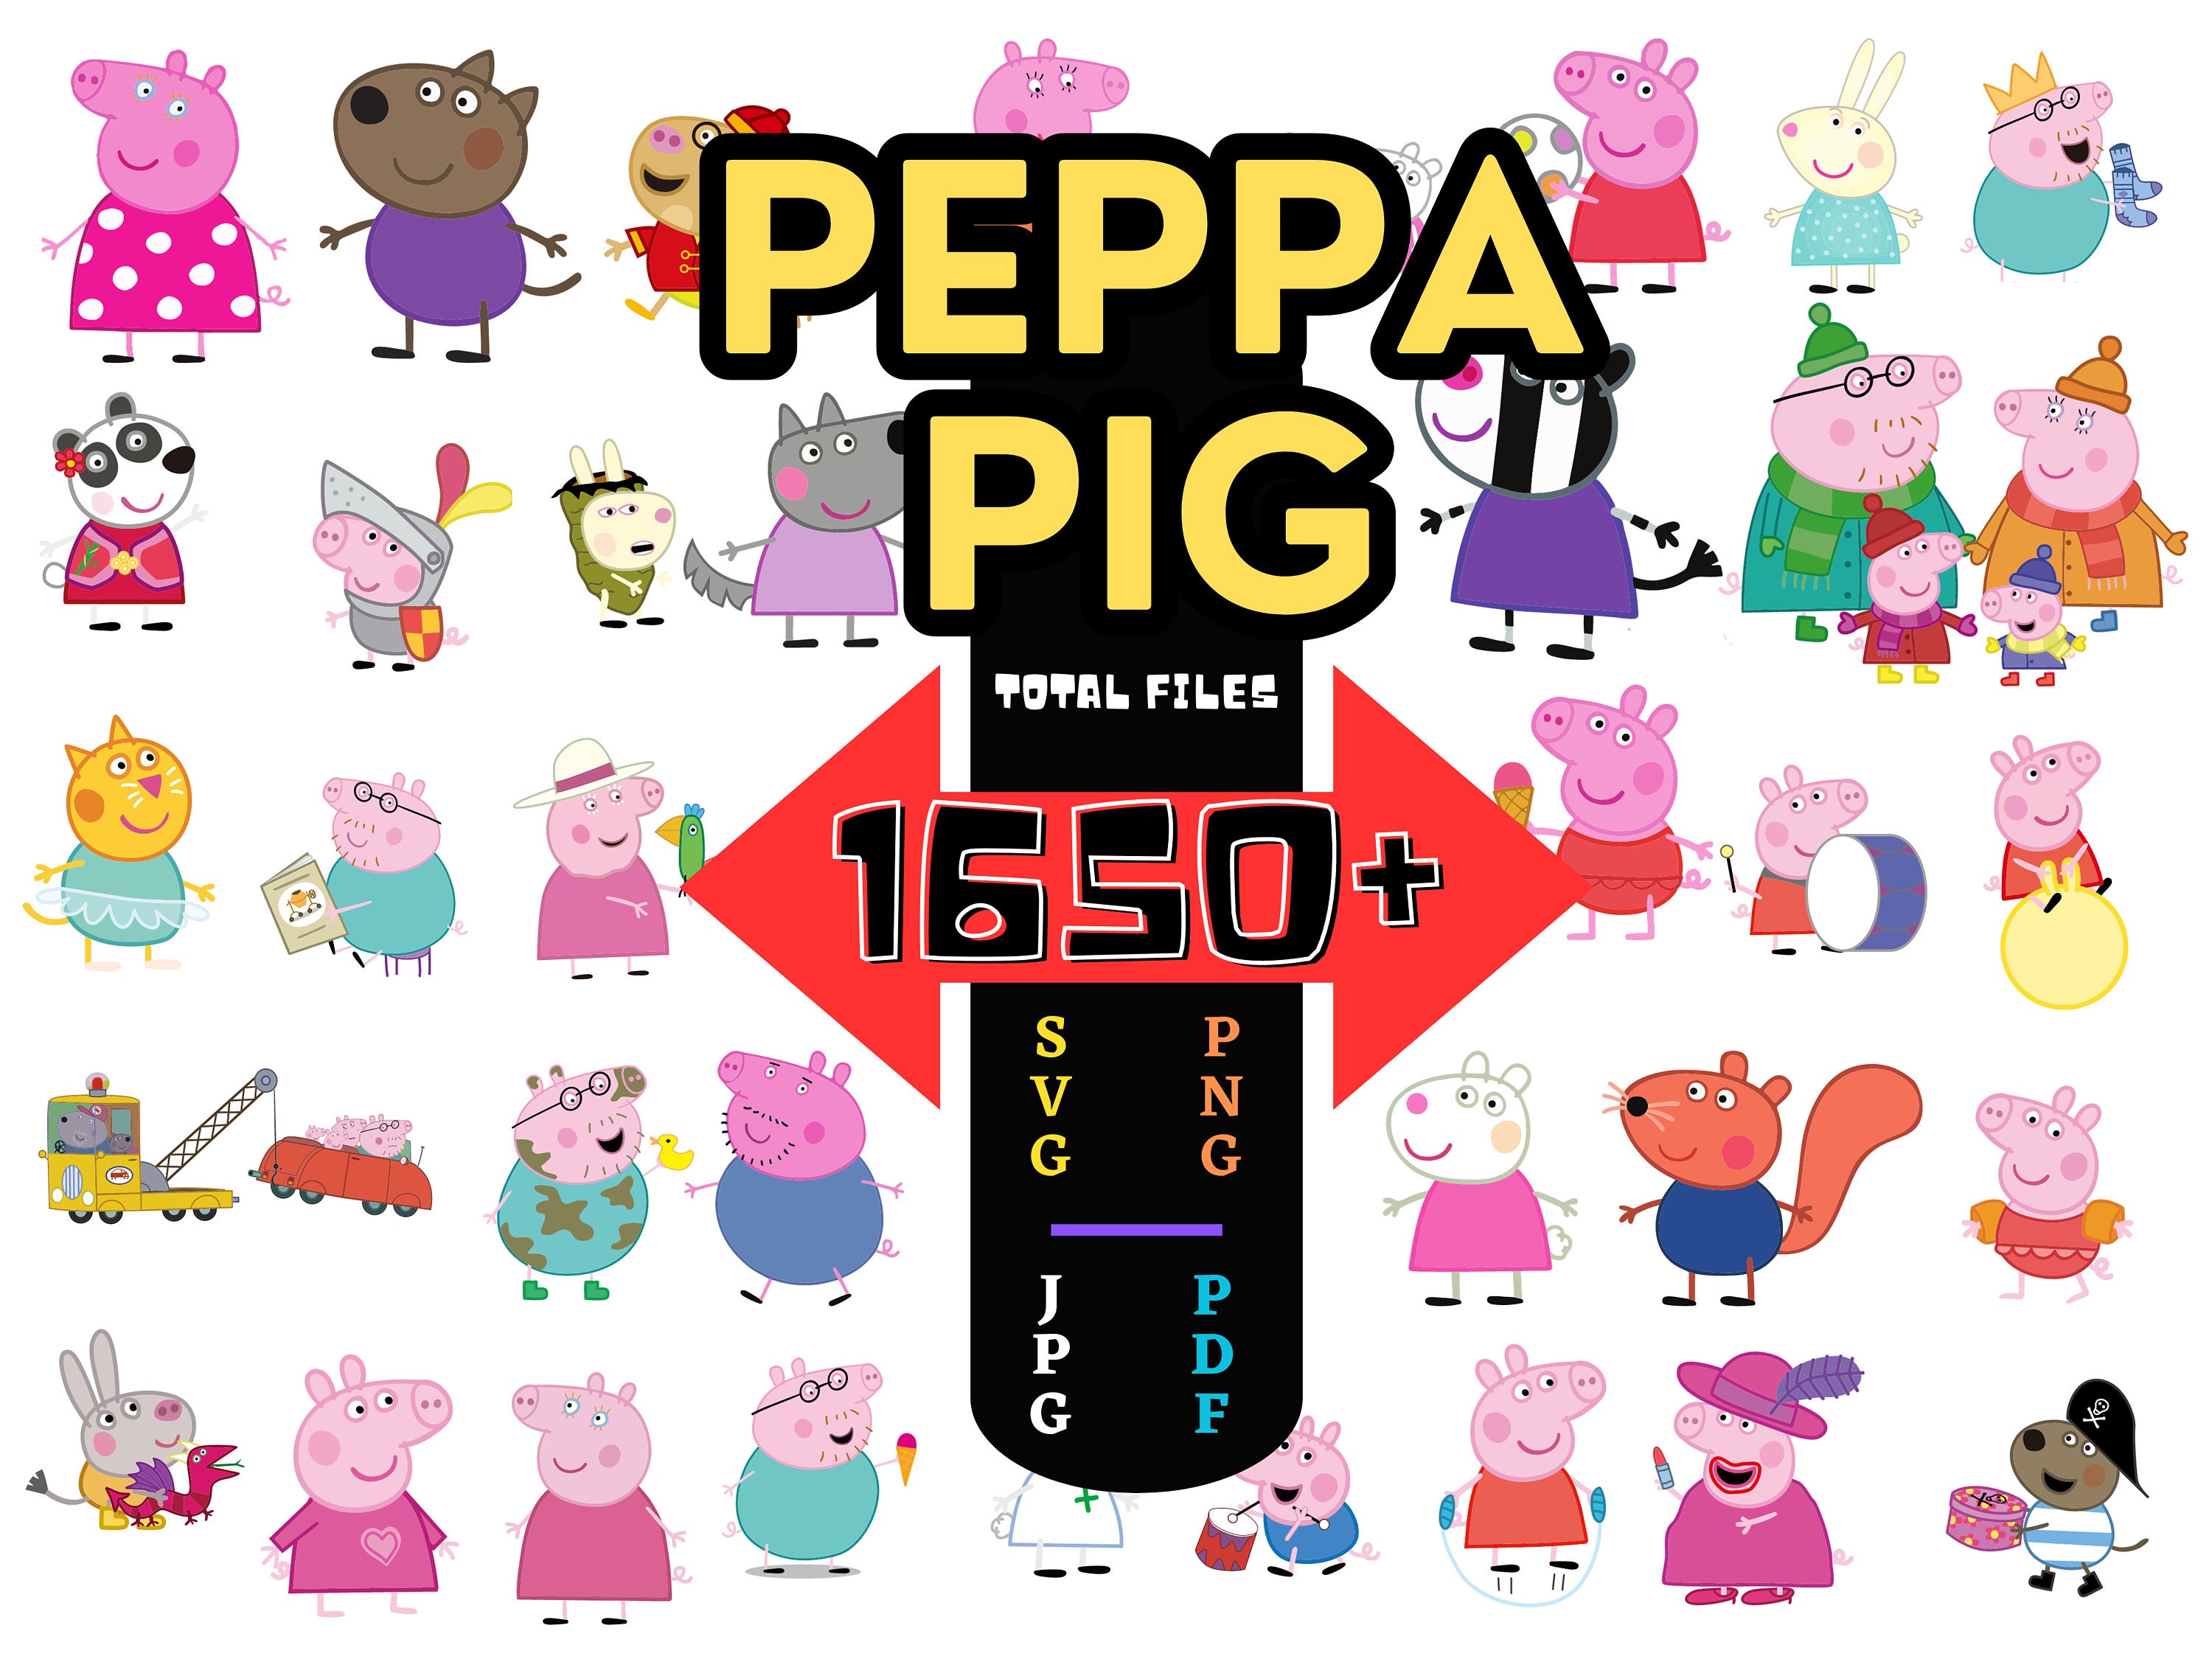 Peppa Pig blocked on Chinese video app after becoming a 'subculture icon' -  ABC News